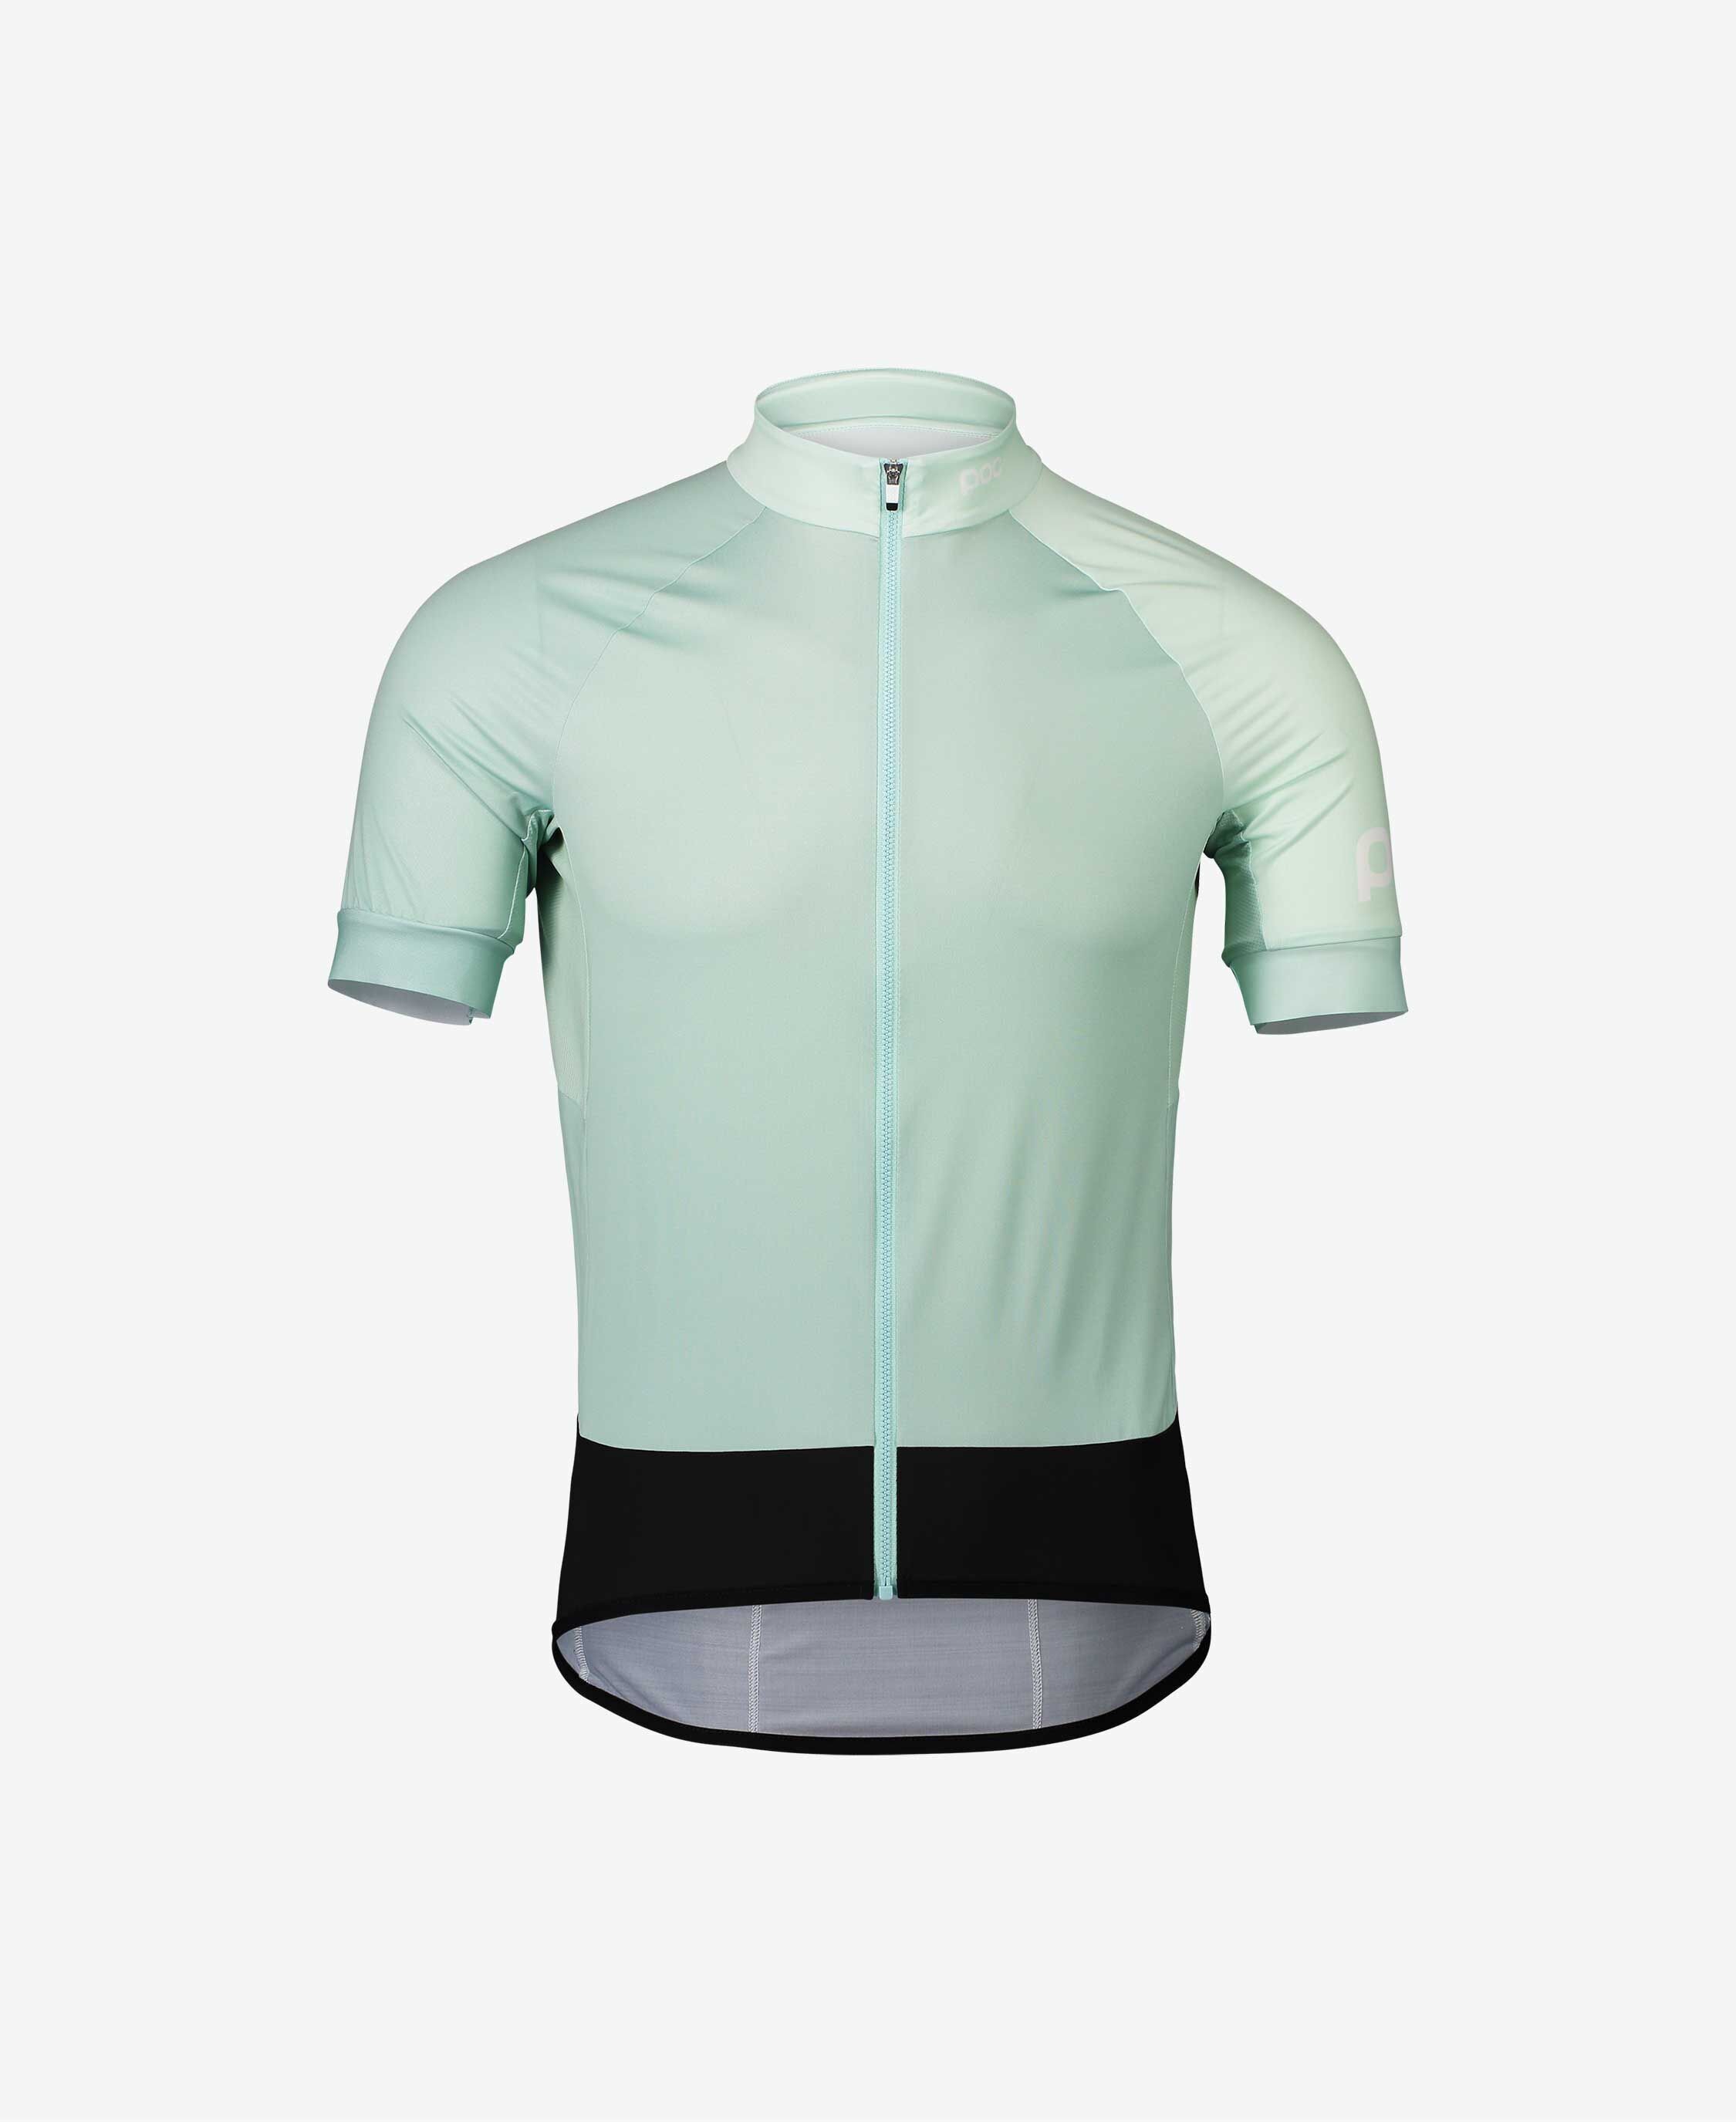 Poc Essential Road Jersey - Cycling jersey - Men's